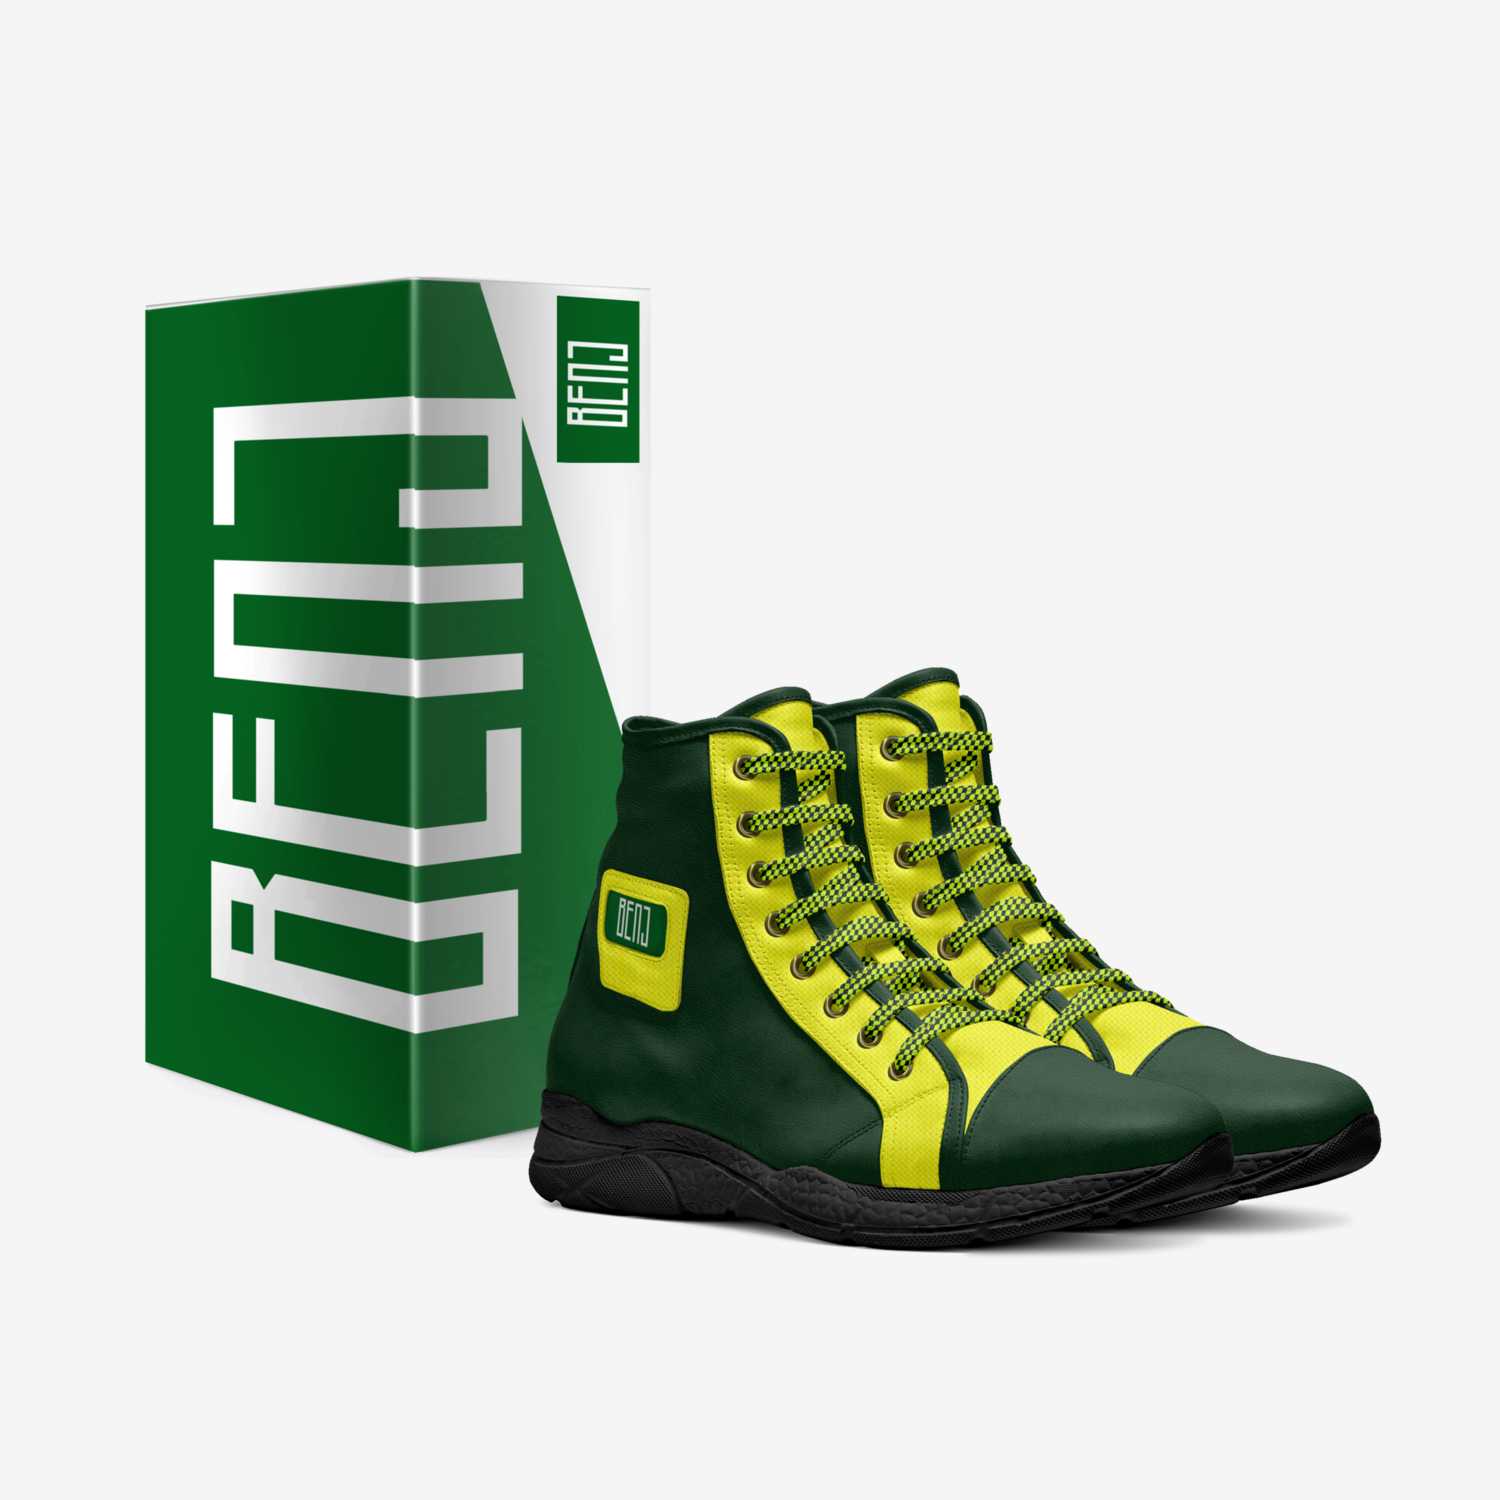 BENJ custom made in Italy shoes by BENJ-URBAN APPAREL. SINCE.2012 | Box view